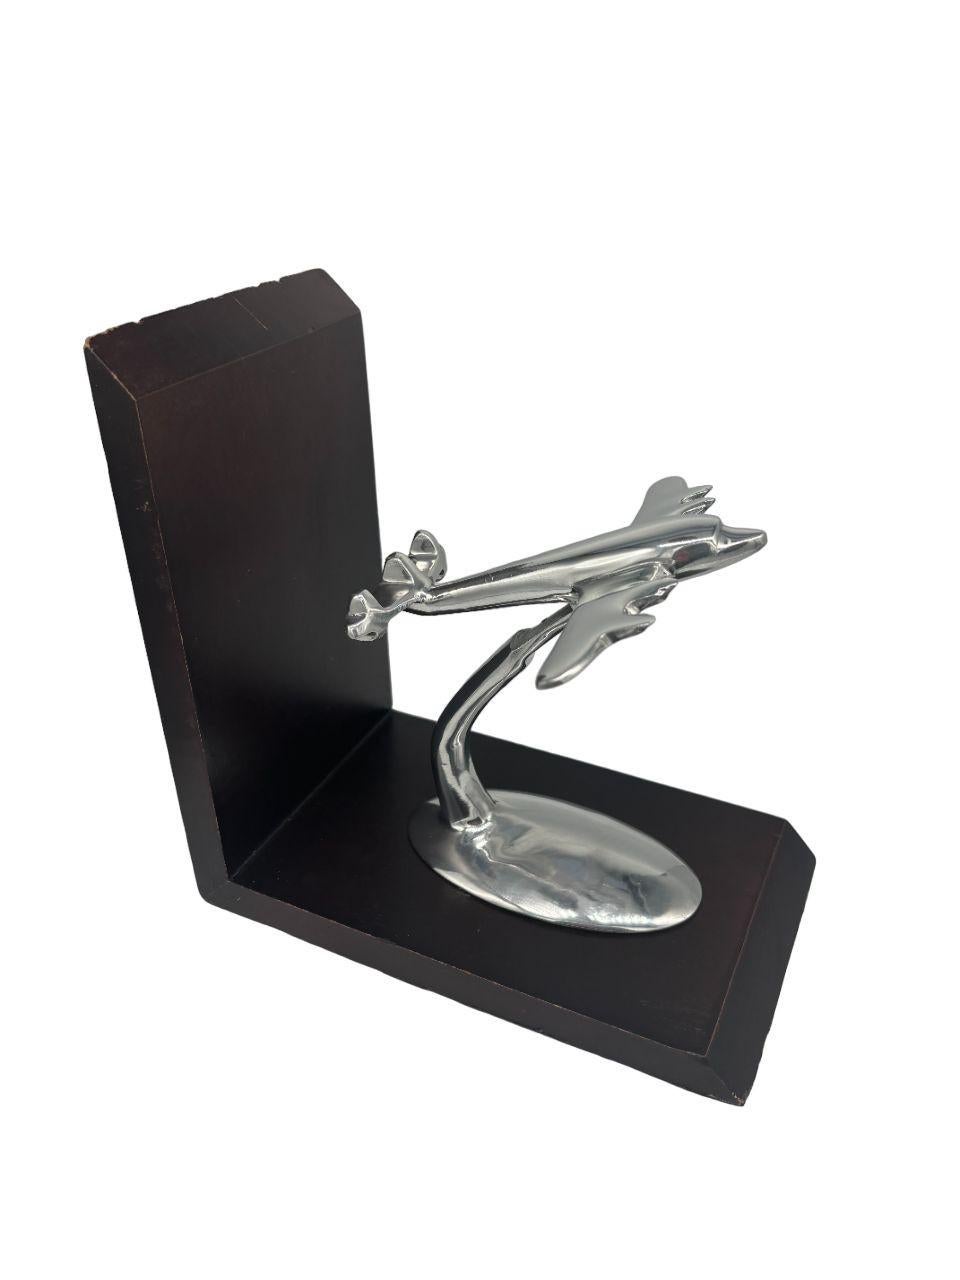 Art Deco Lockheed Constellation Airplane Aluminum Bookends In Excellent Condition In Van Nuys, CA